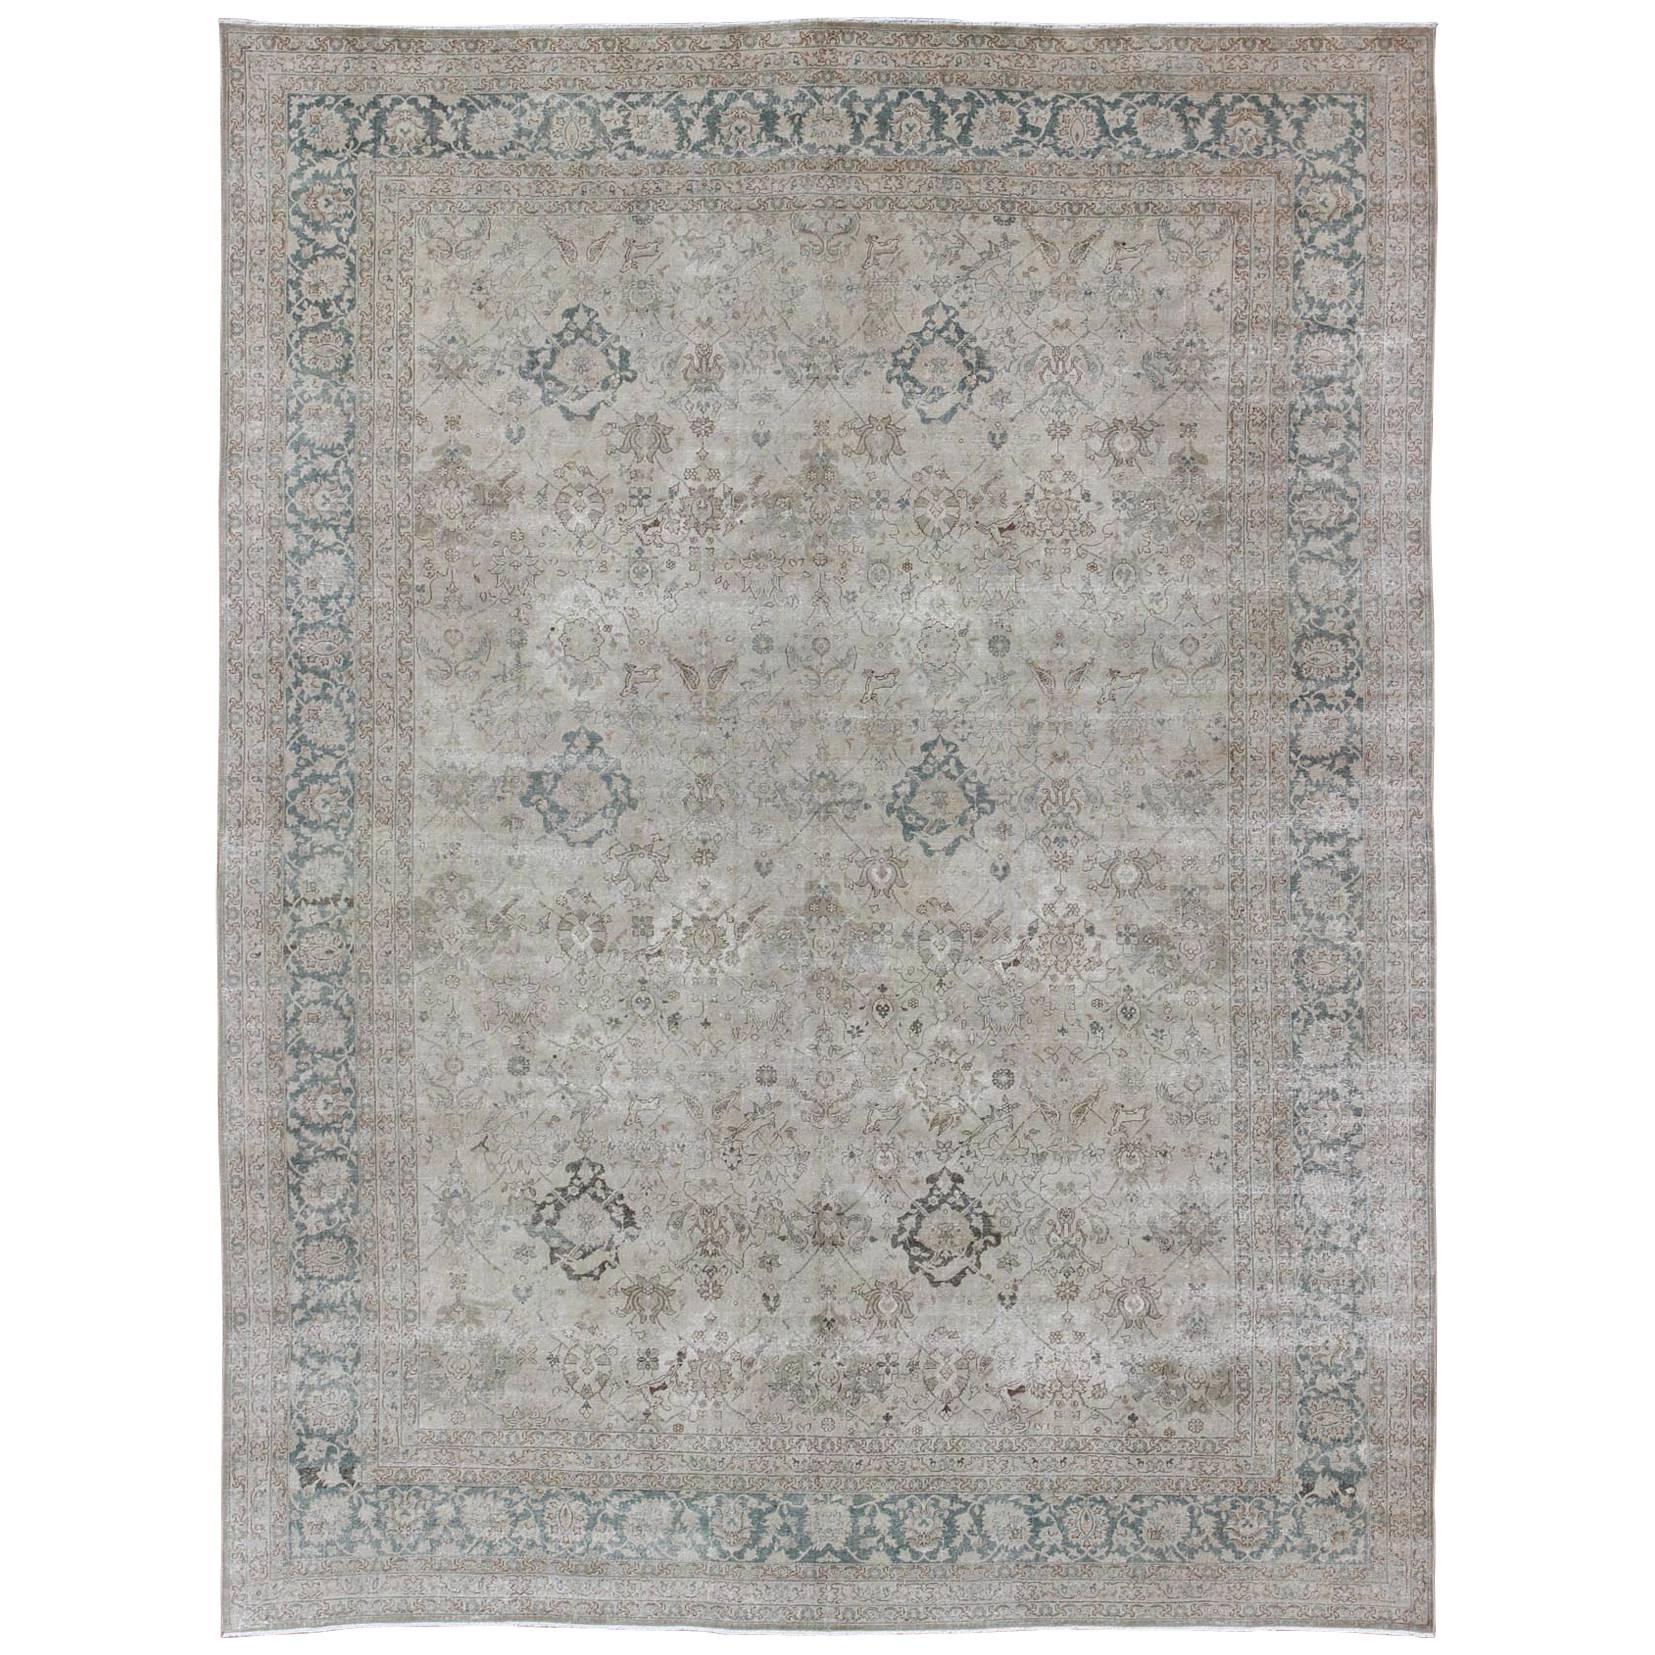 All-Over Design Antique Turkish Sivas Rug in Gray, Ivory, and Blue Tones